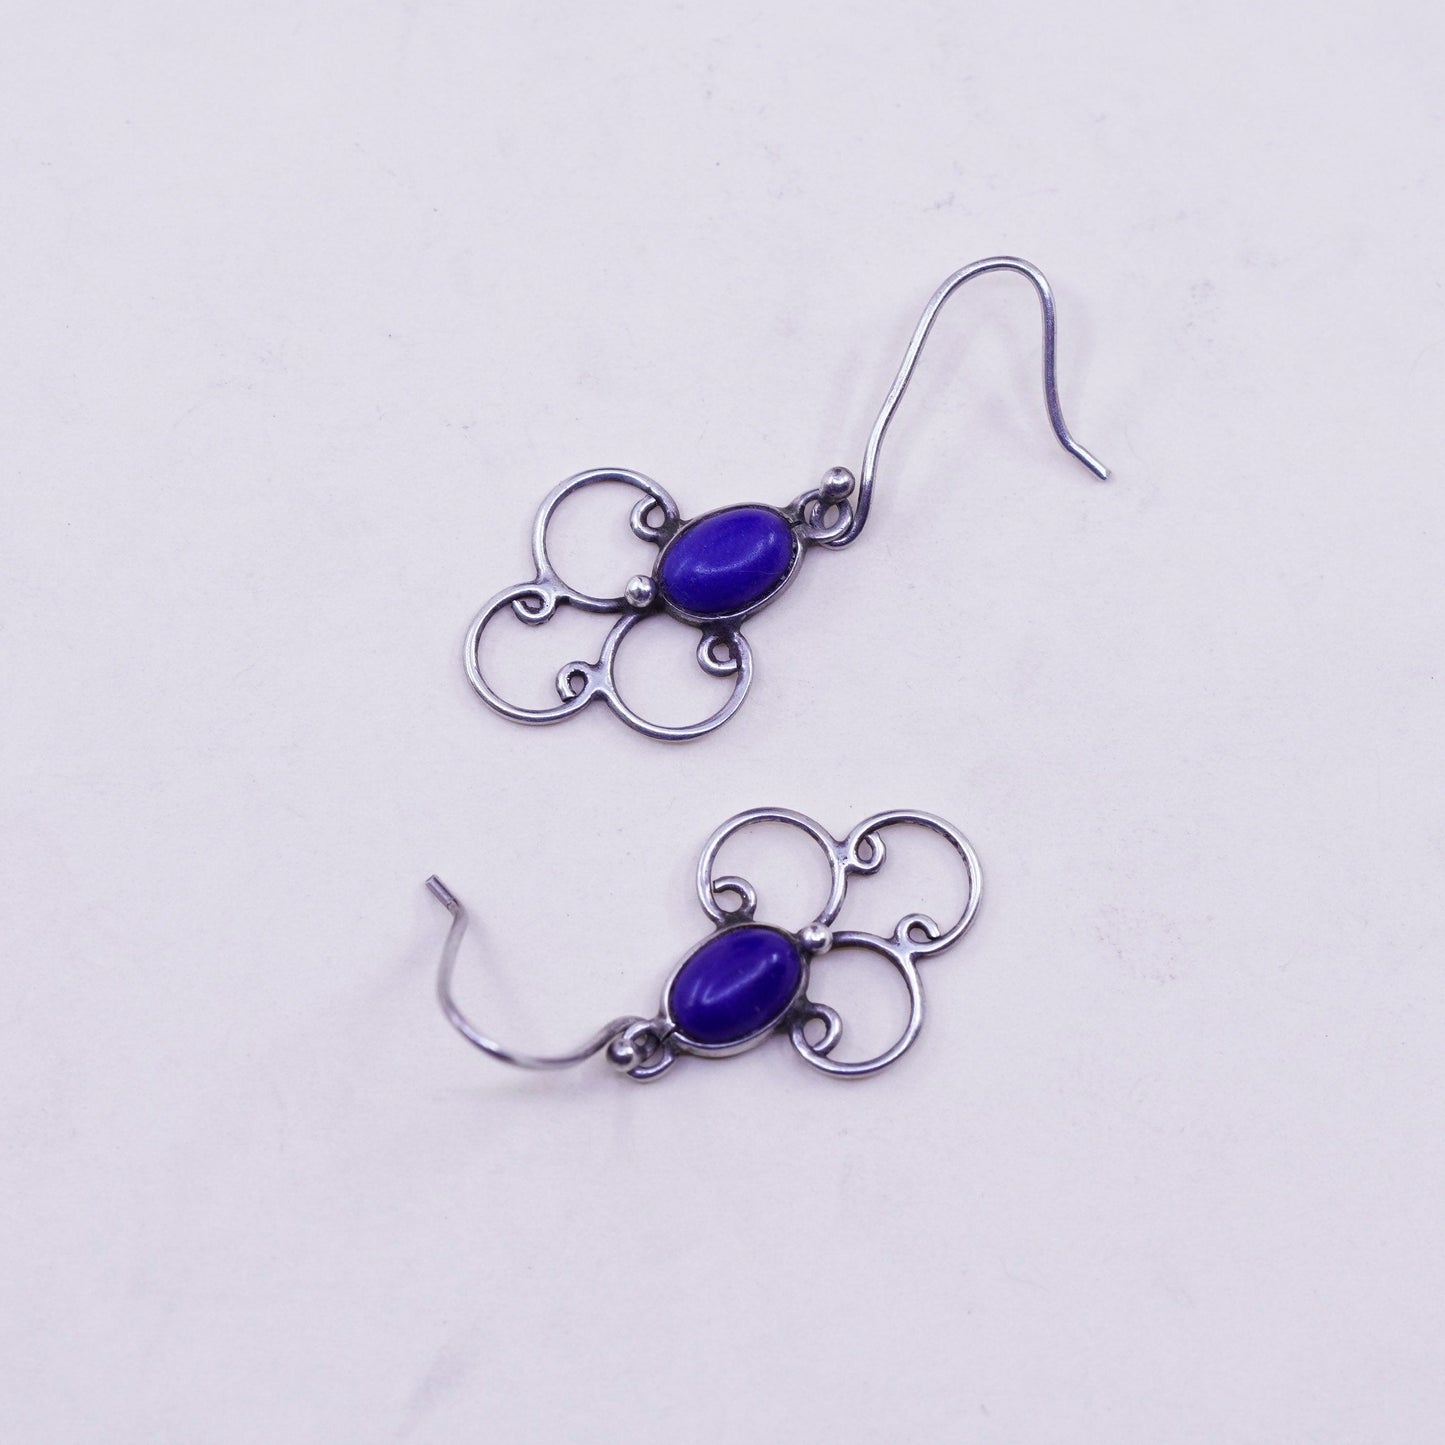 Vintage Sterling 925 Silver Handmade earrings with oval lapis lazuli inlay